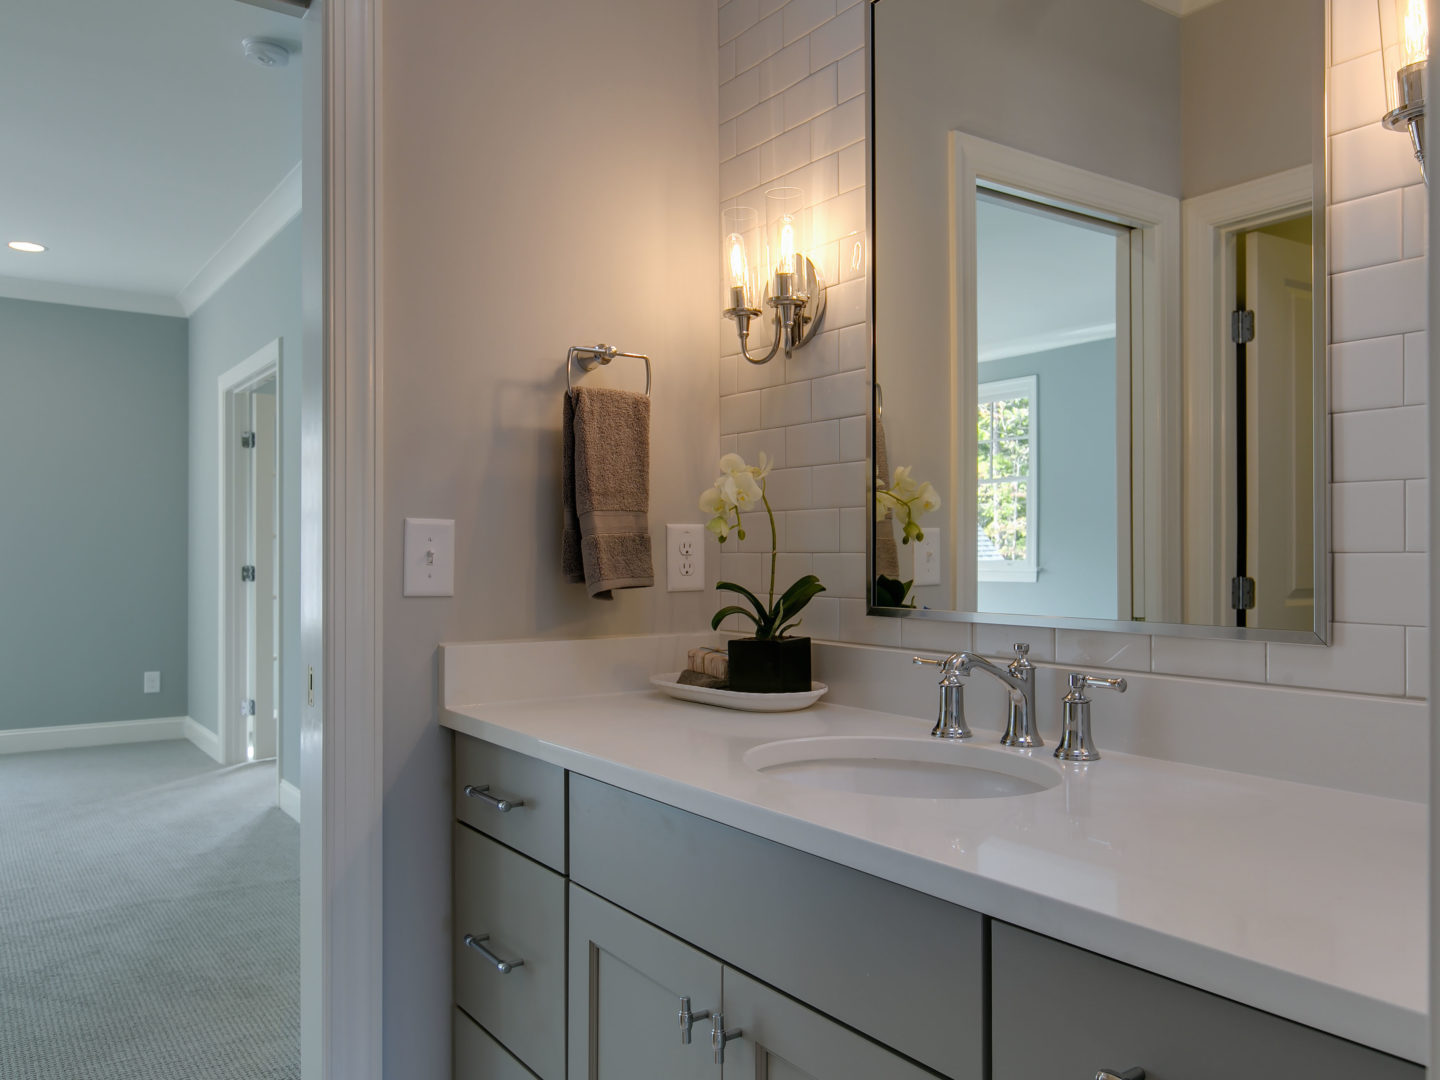 Baths Gallery - 1st Choice Cabinetry